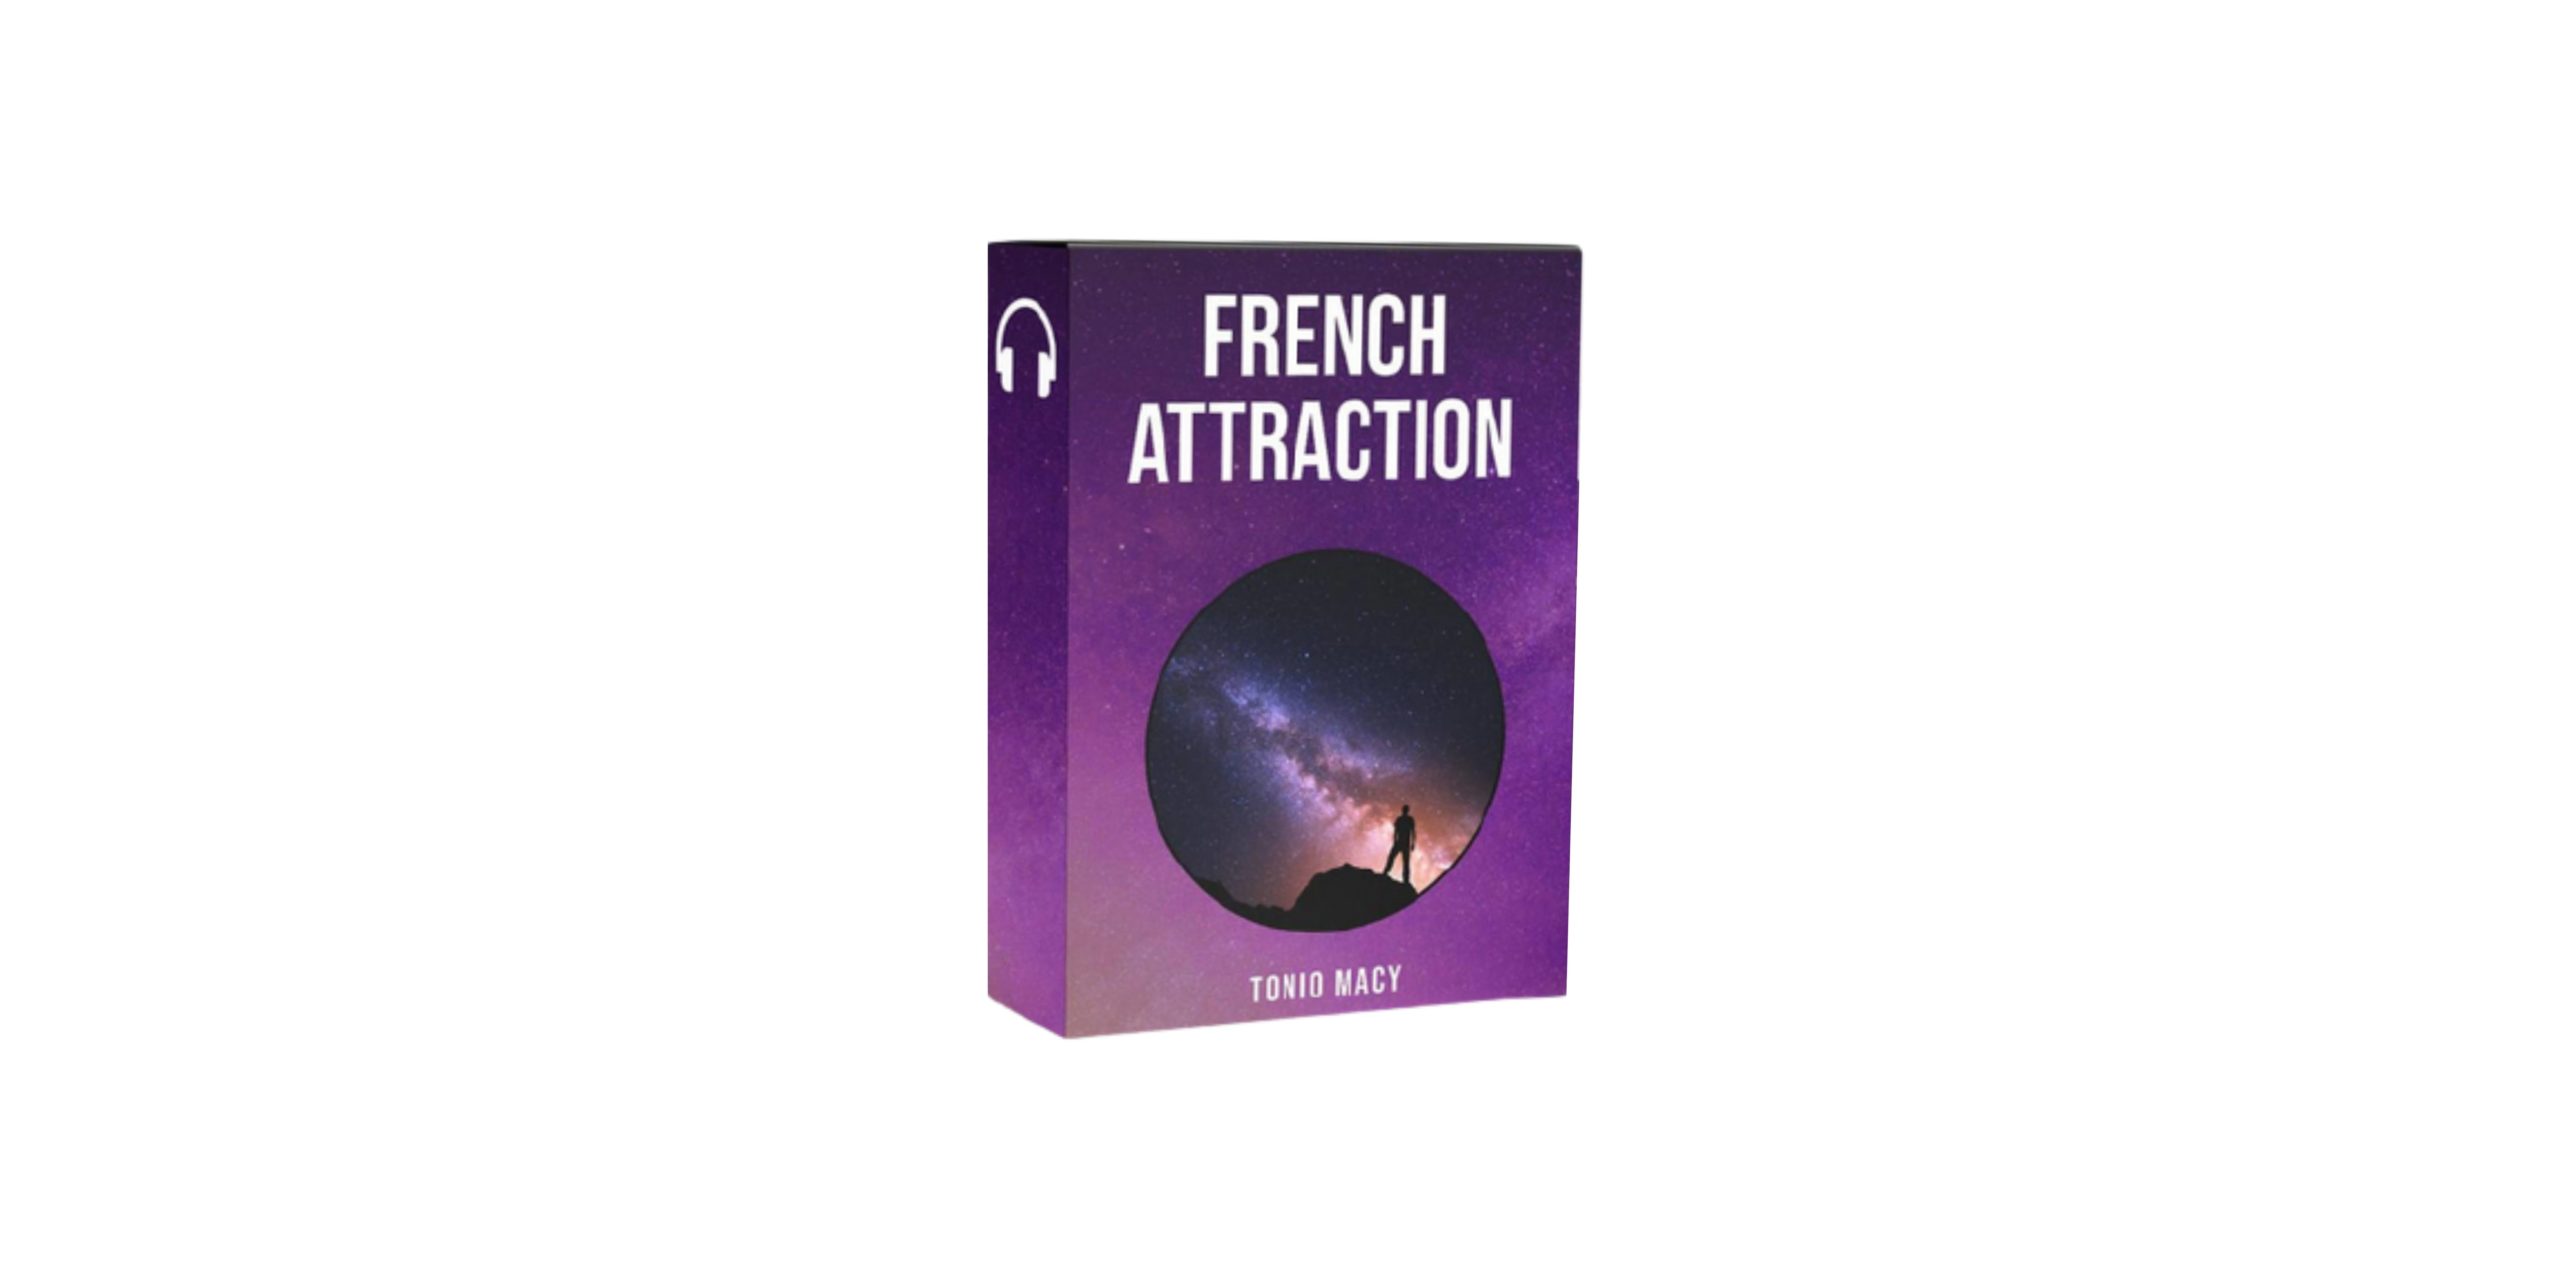 French Attraction Reviews